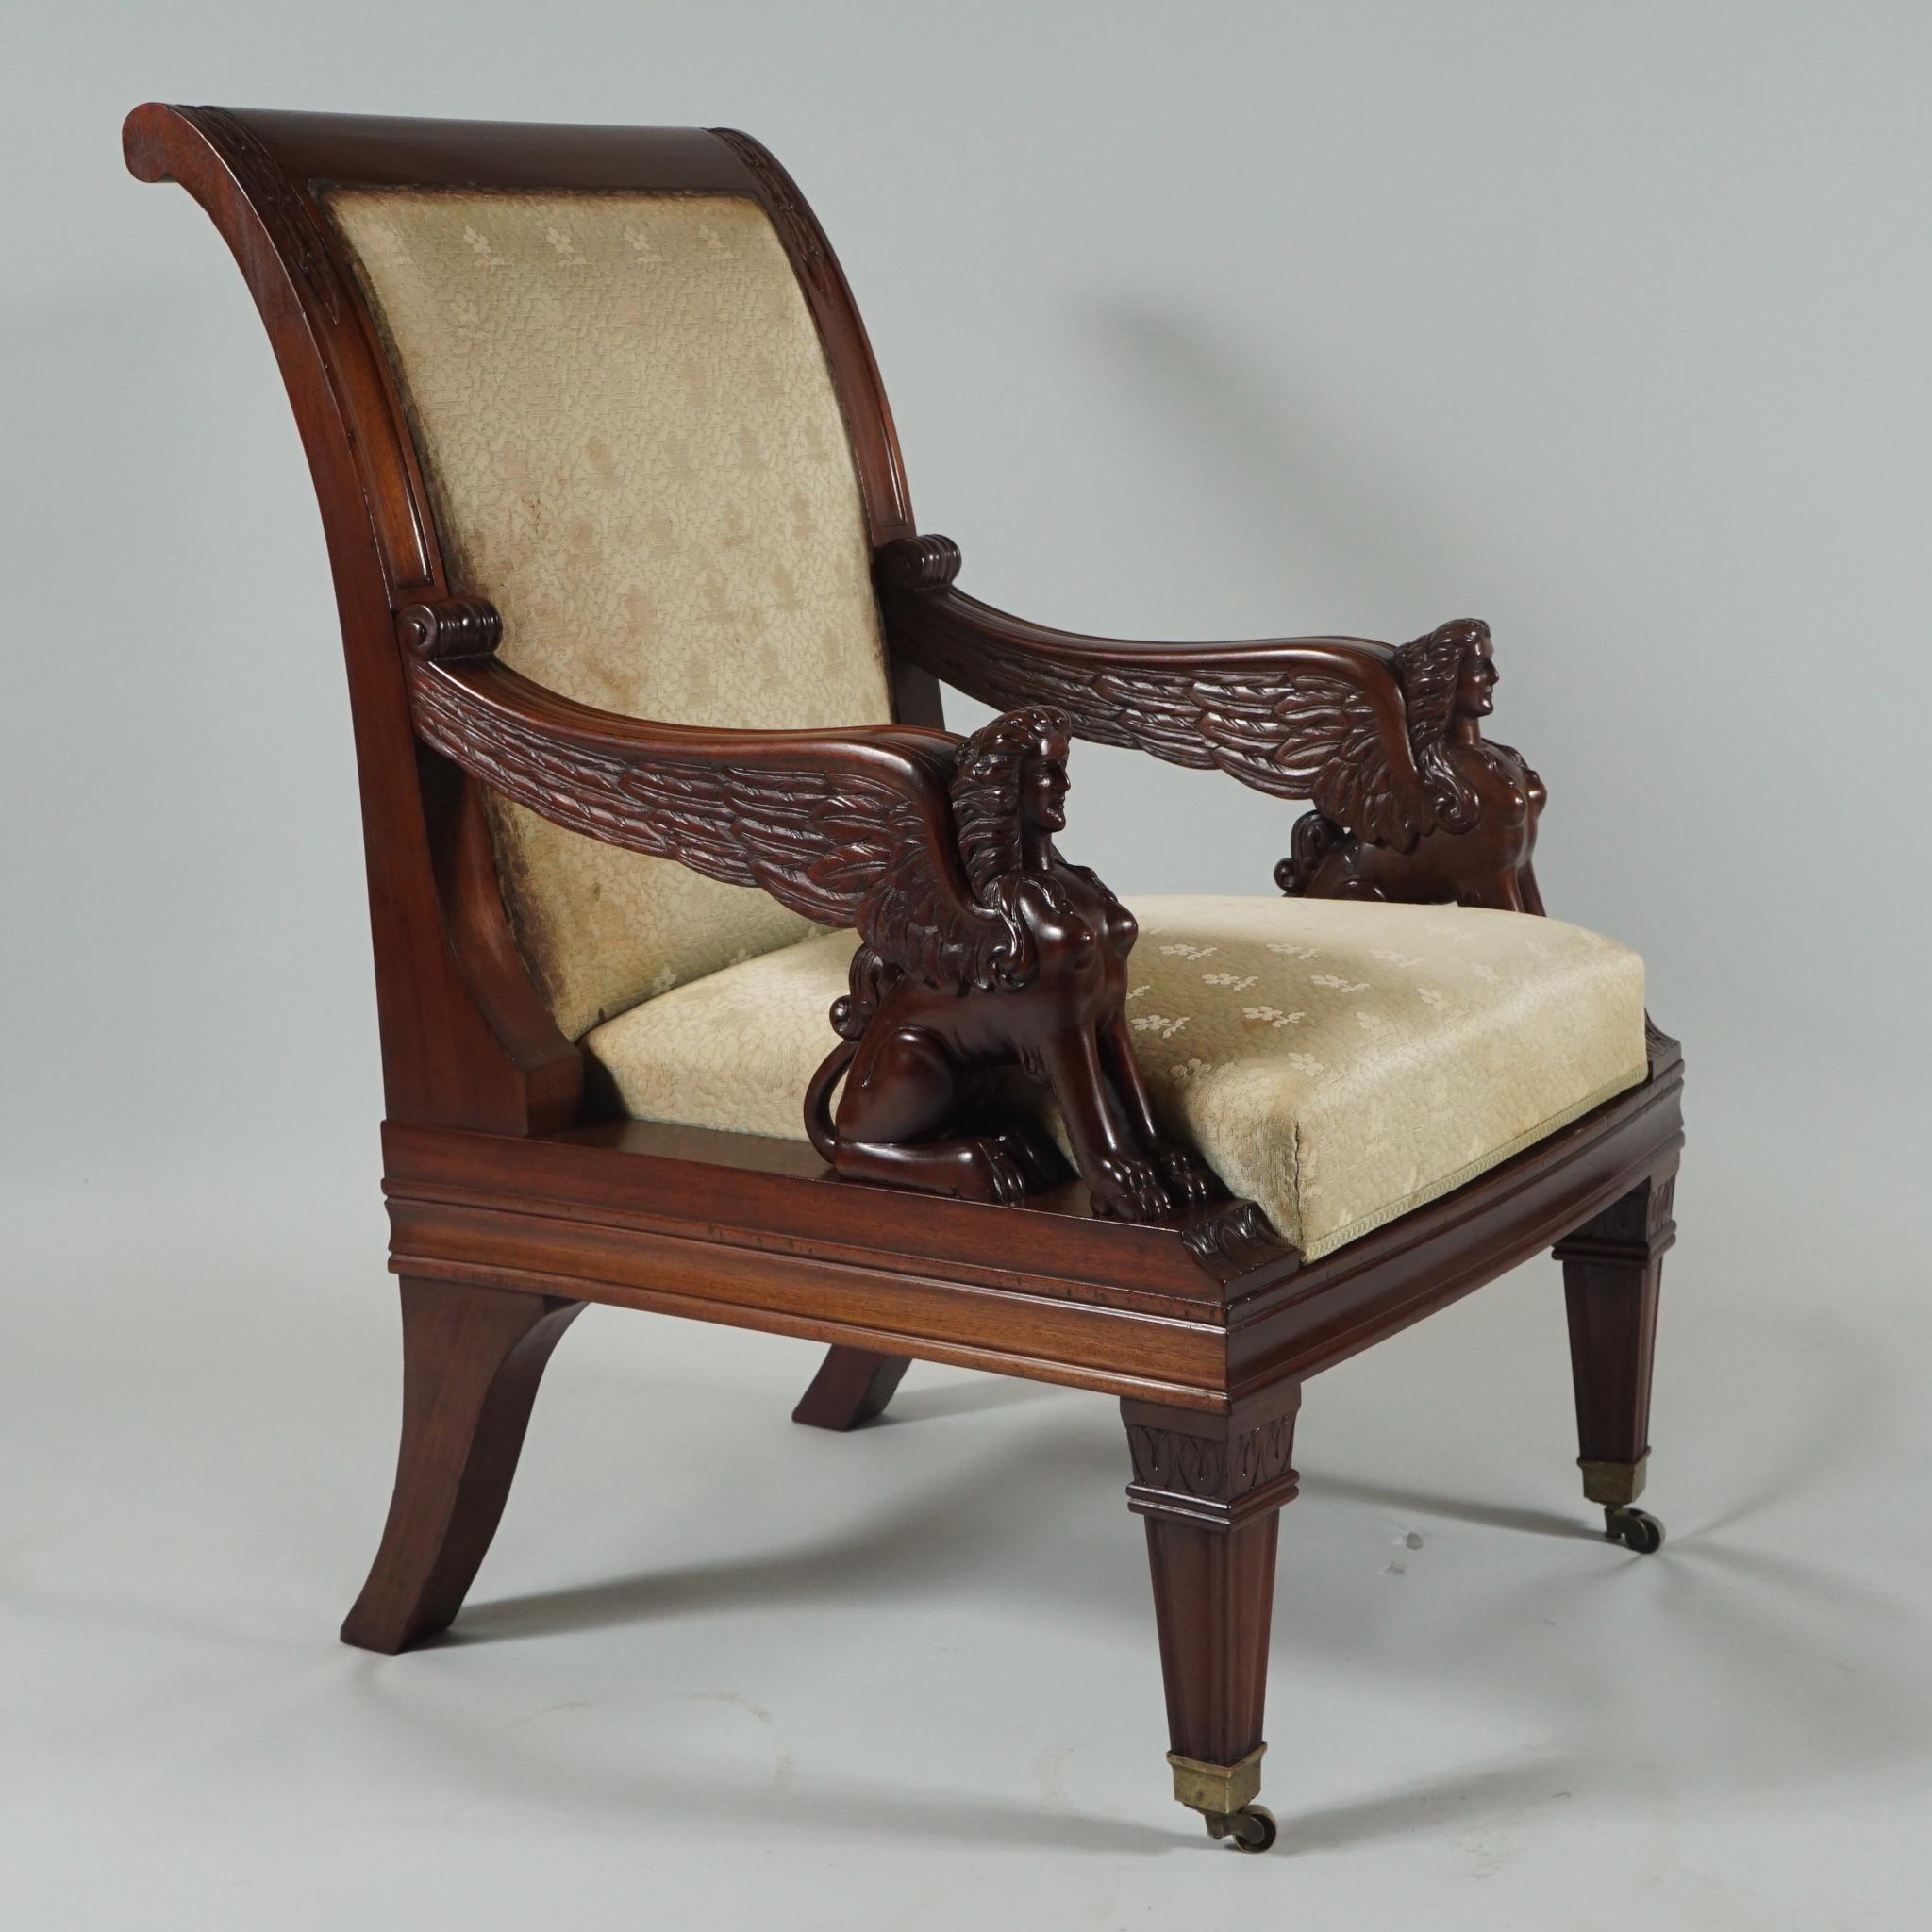 Pair of handsome Egyptian Revival armchairs or library chairs in mahogany with 
elaborate hand-carved griffins on the arms. Front legs are on castors for easy moving. 

  